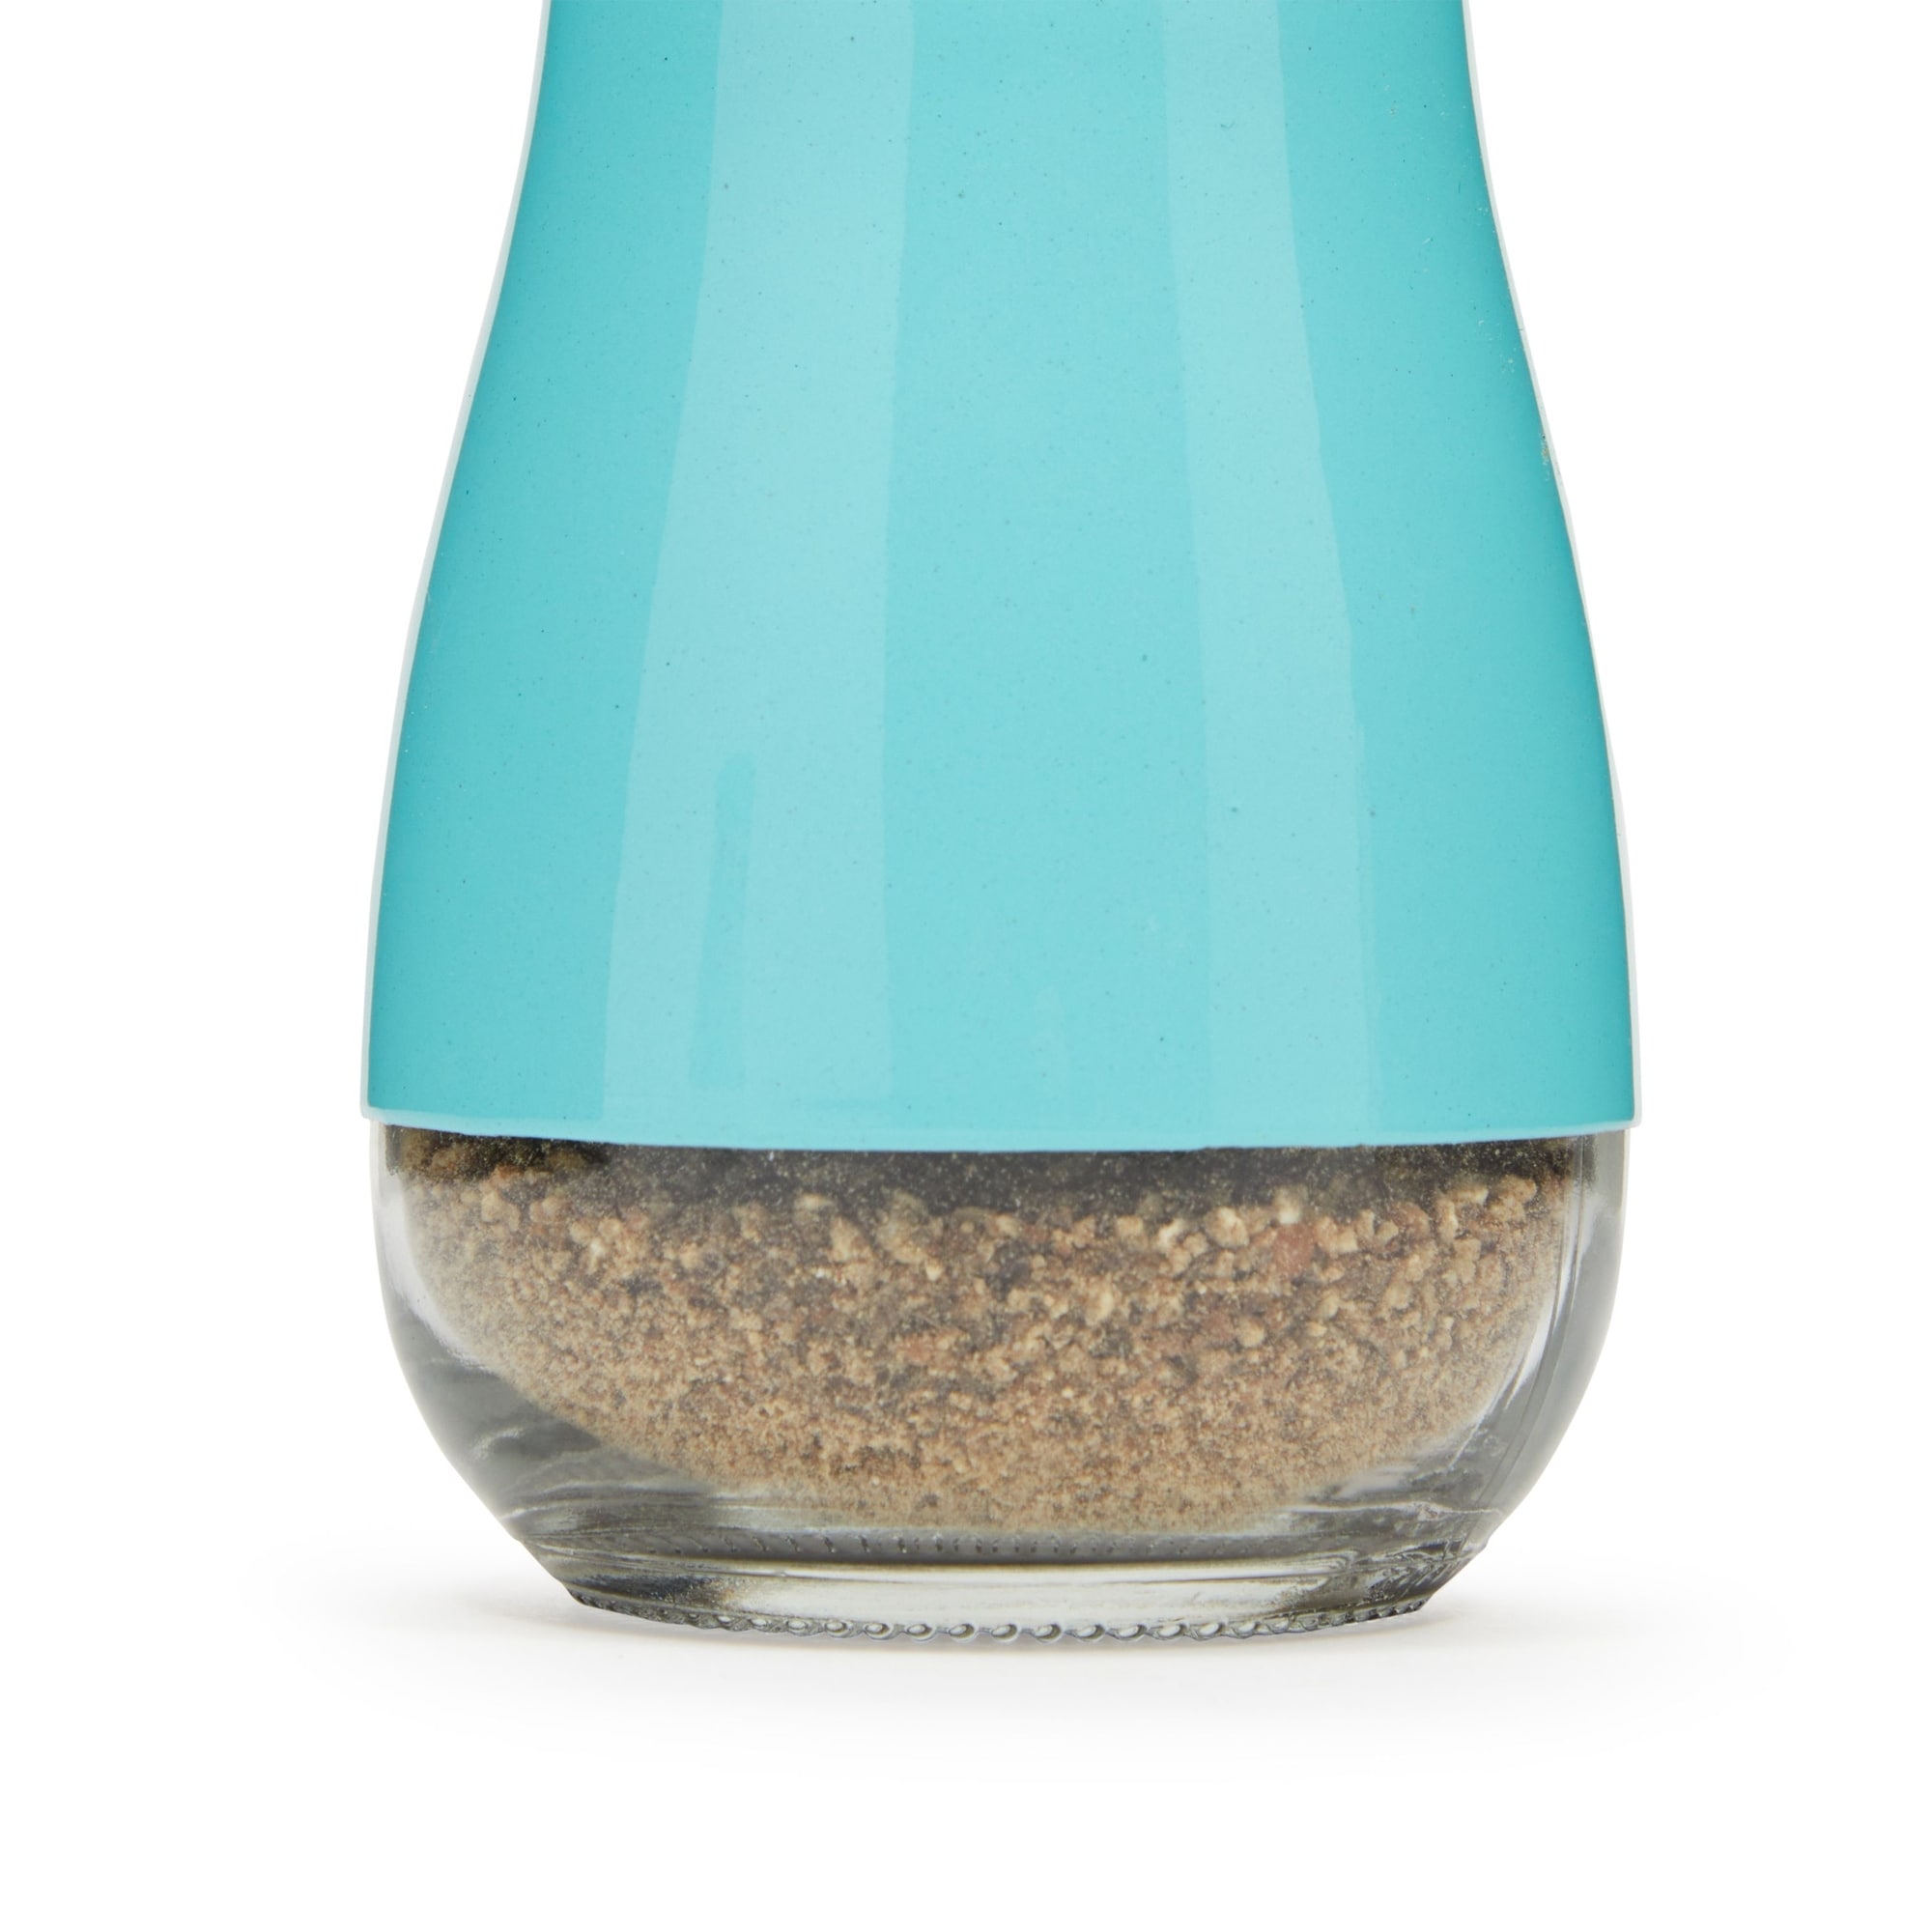 https://ak1.ostkcdn.com/images/products/is/images/direct/08c08723cdc1cae6ad3c88085fb115e9daccbb27/Teal-Salt-and-Pepper-Shakers-with-Glass-Bottom%2C-Stainless-Steel-Refillable-%282-Piece-Set%29.jpg